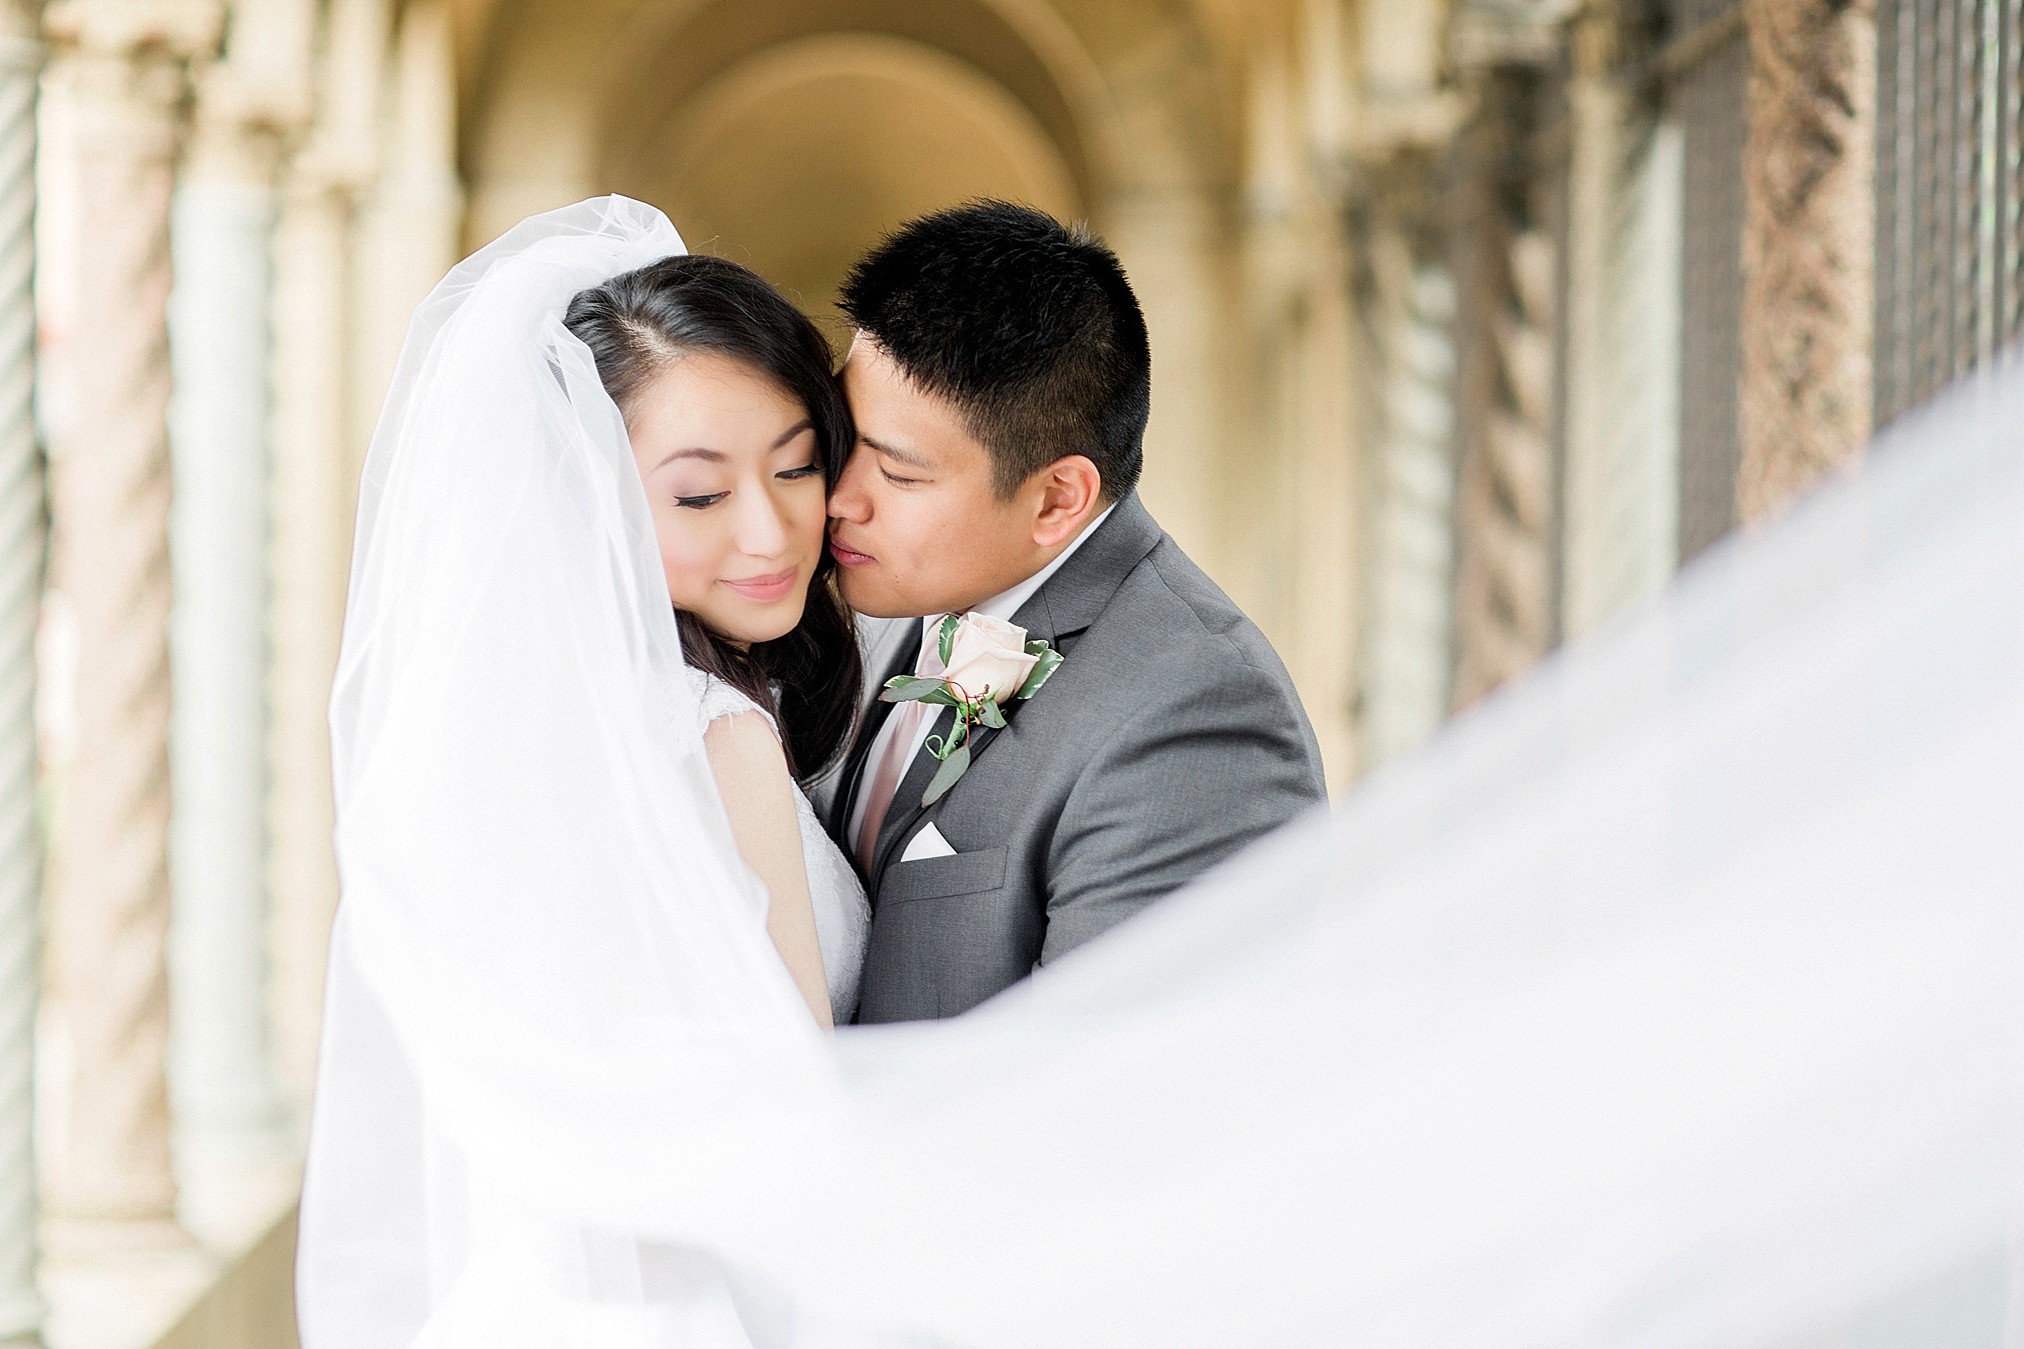 View More: http://dyannajoyphotography.pass.us/jamie-and-andrew-wedding